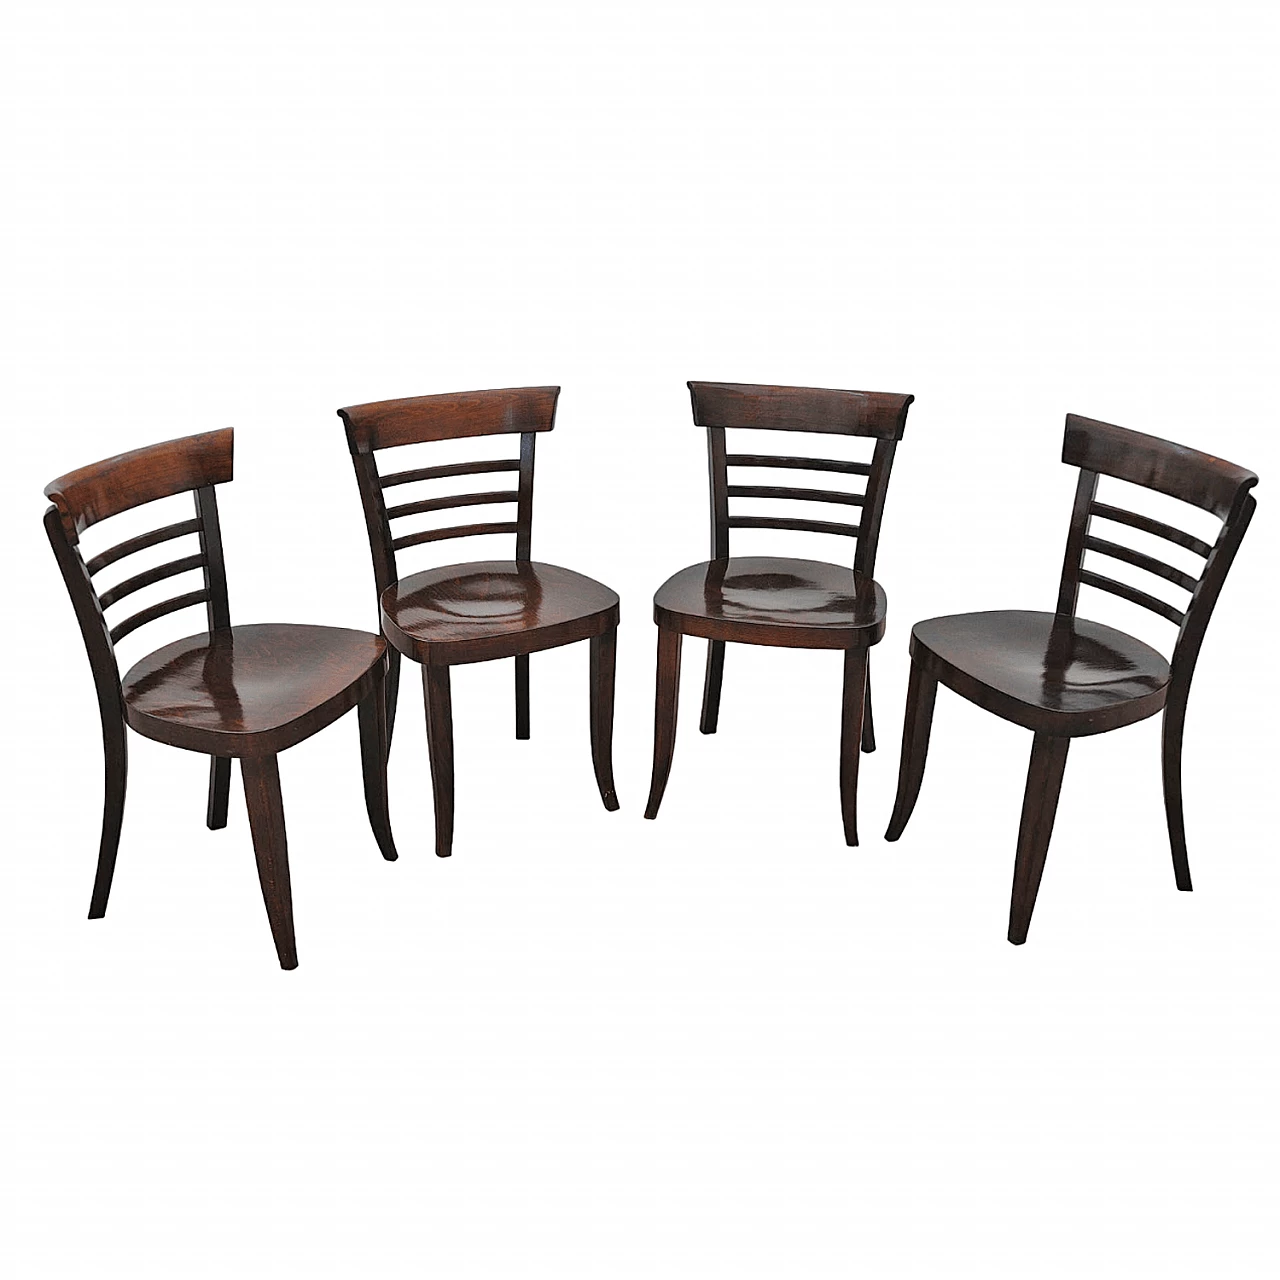 4 Walnut chairs by Thonet, 1950s 1